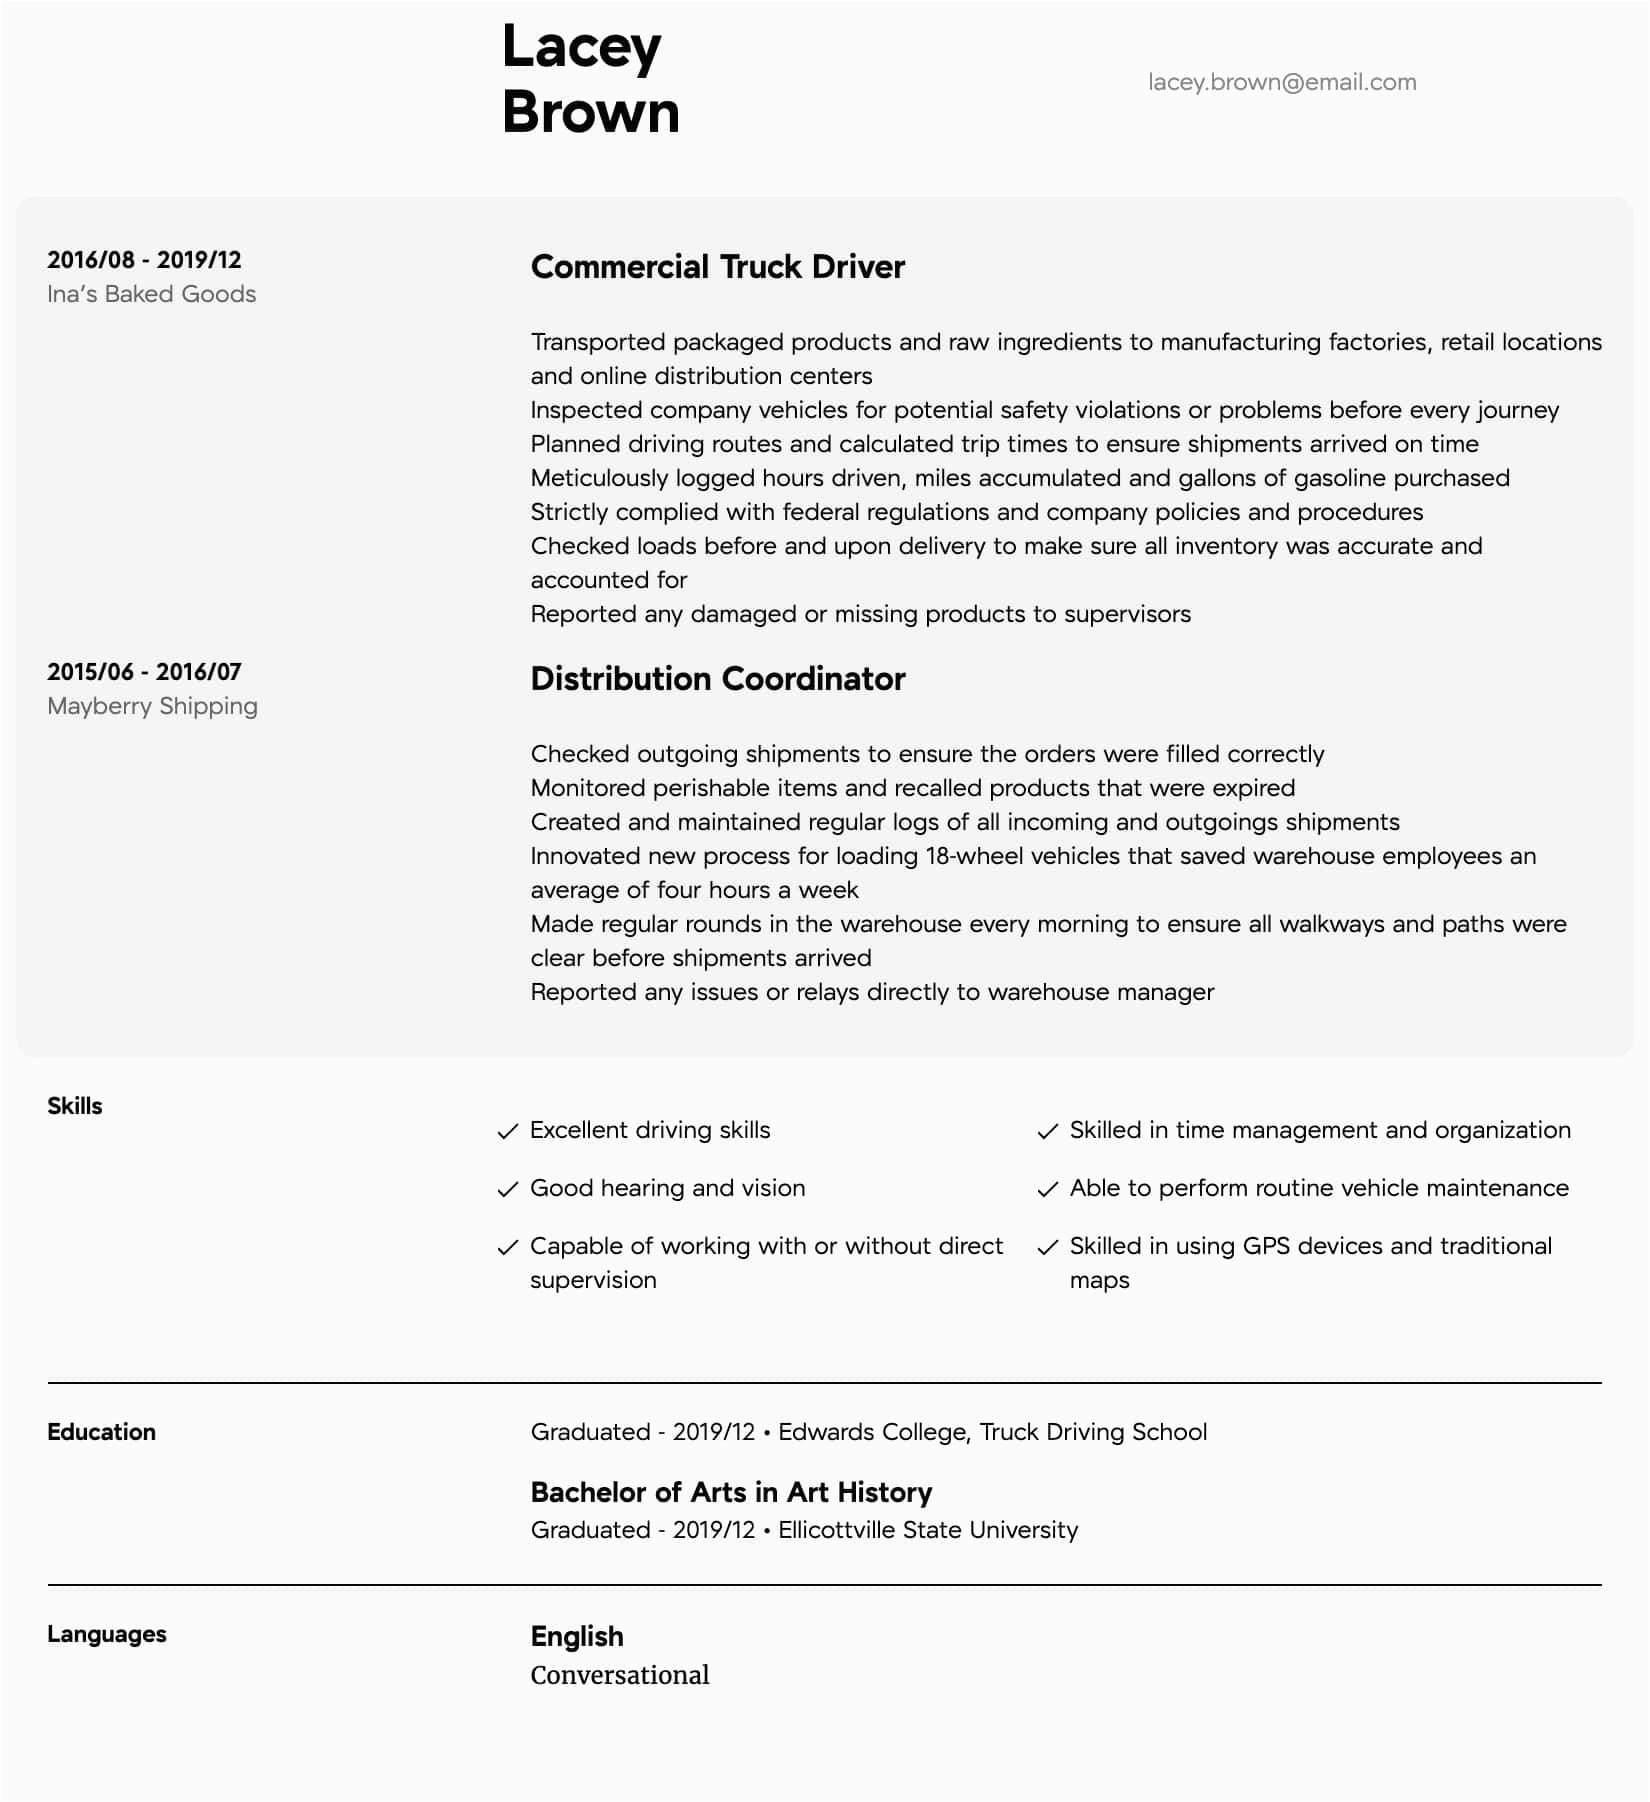 Resume Samples for Truck Drivers with An Objective Truck Driver Resume Samples